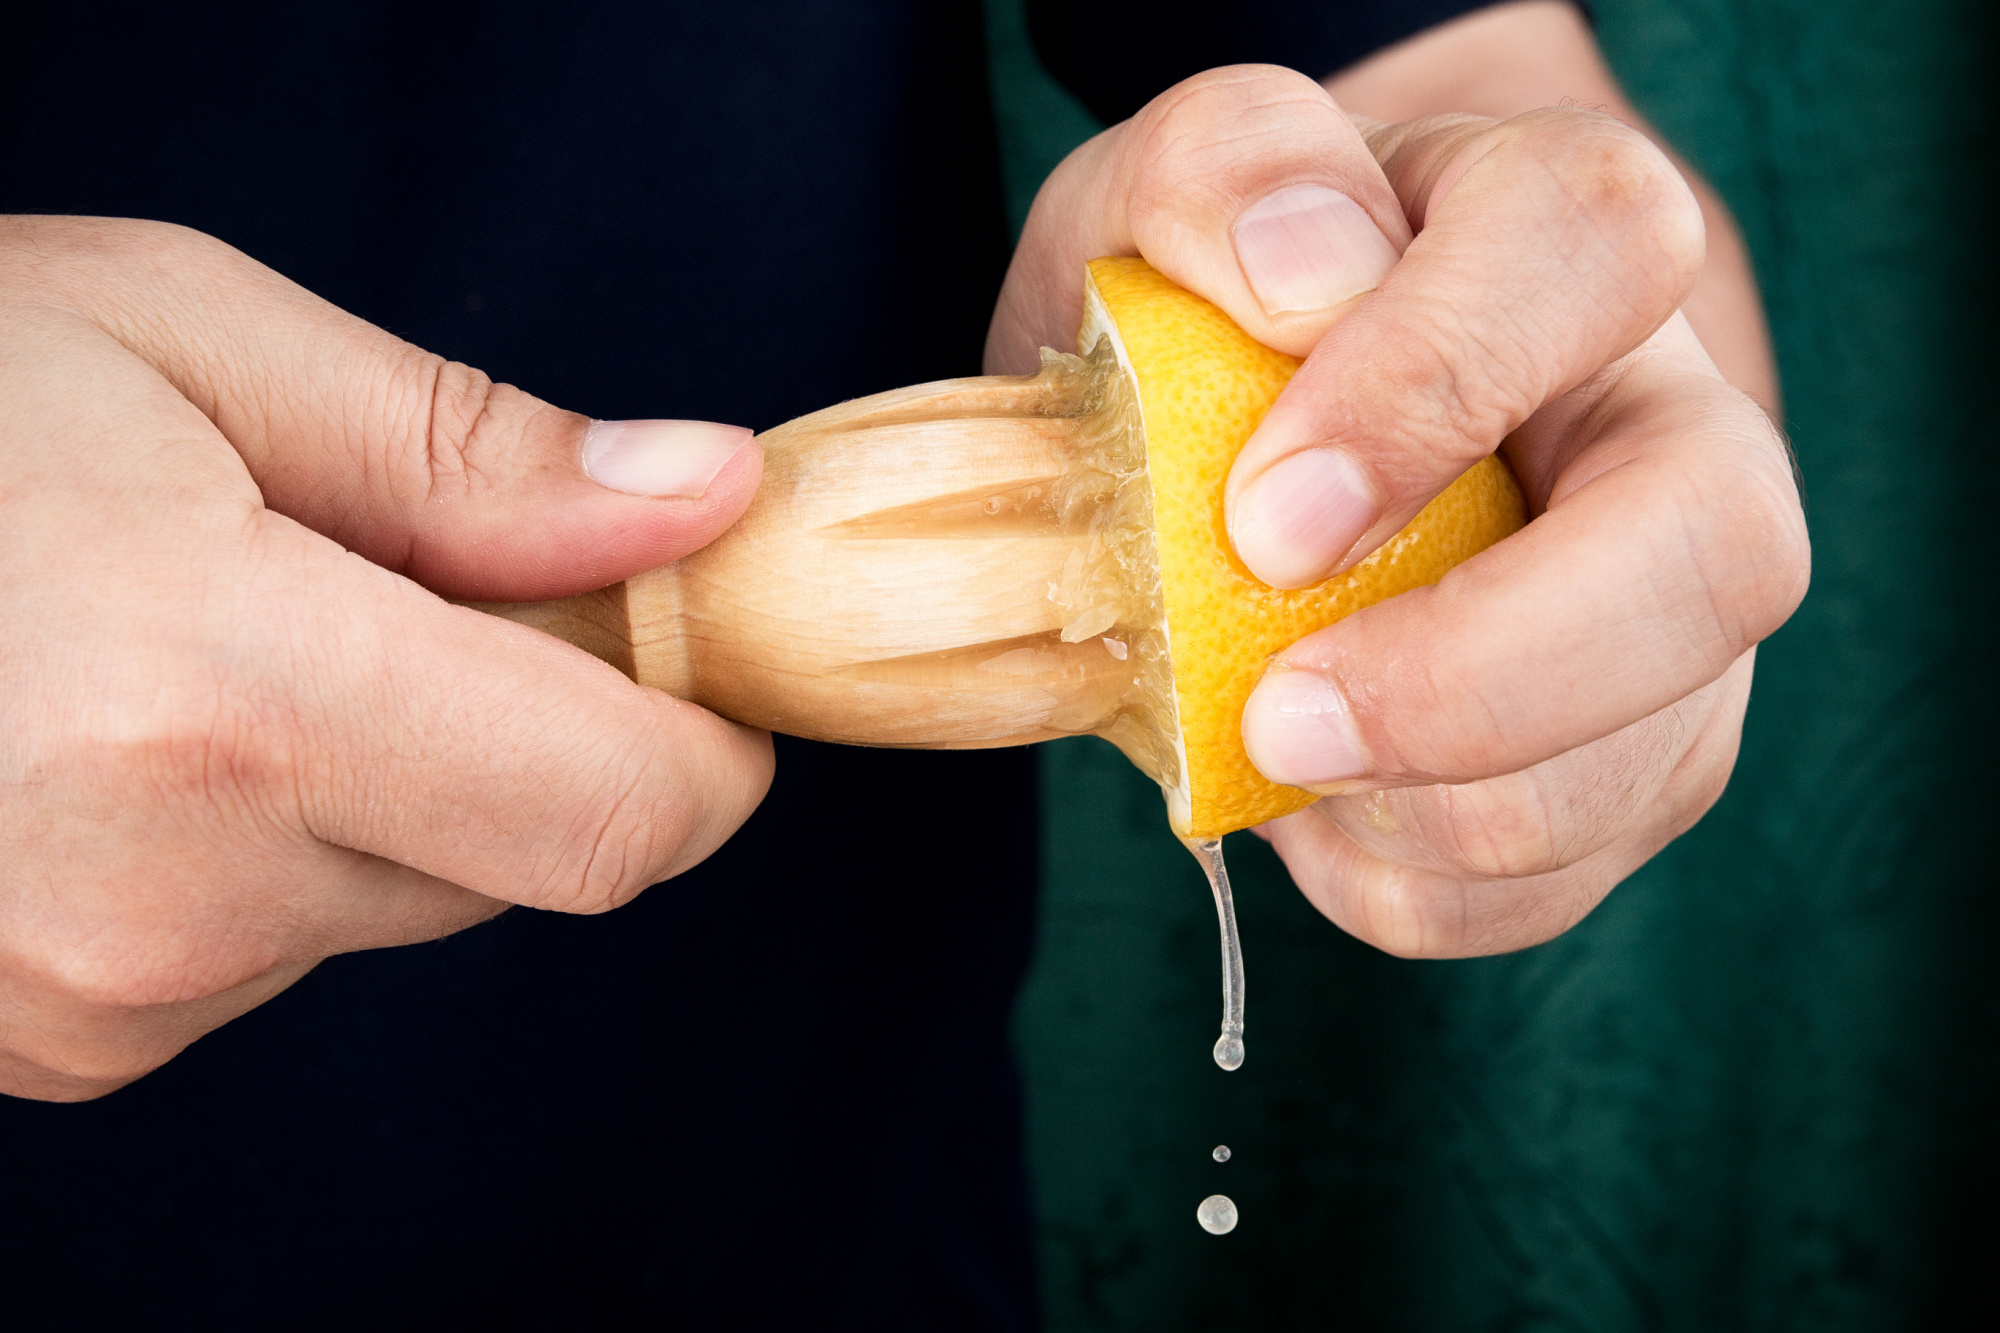 A person squeezing a lemon with a wooden spoon.